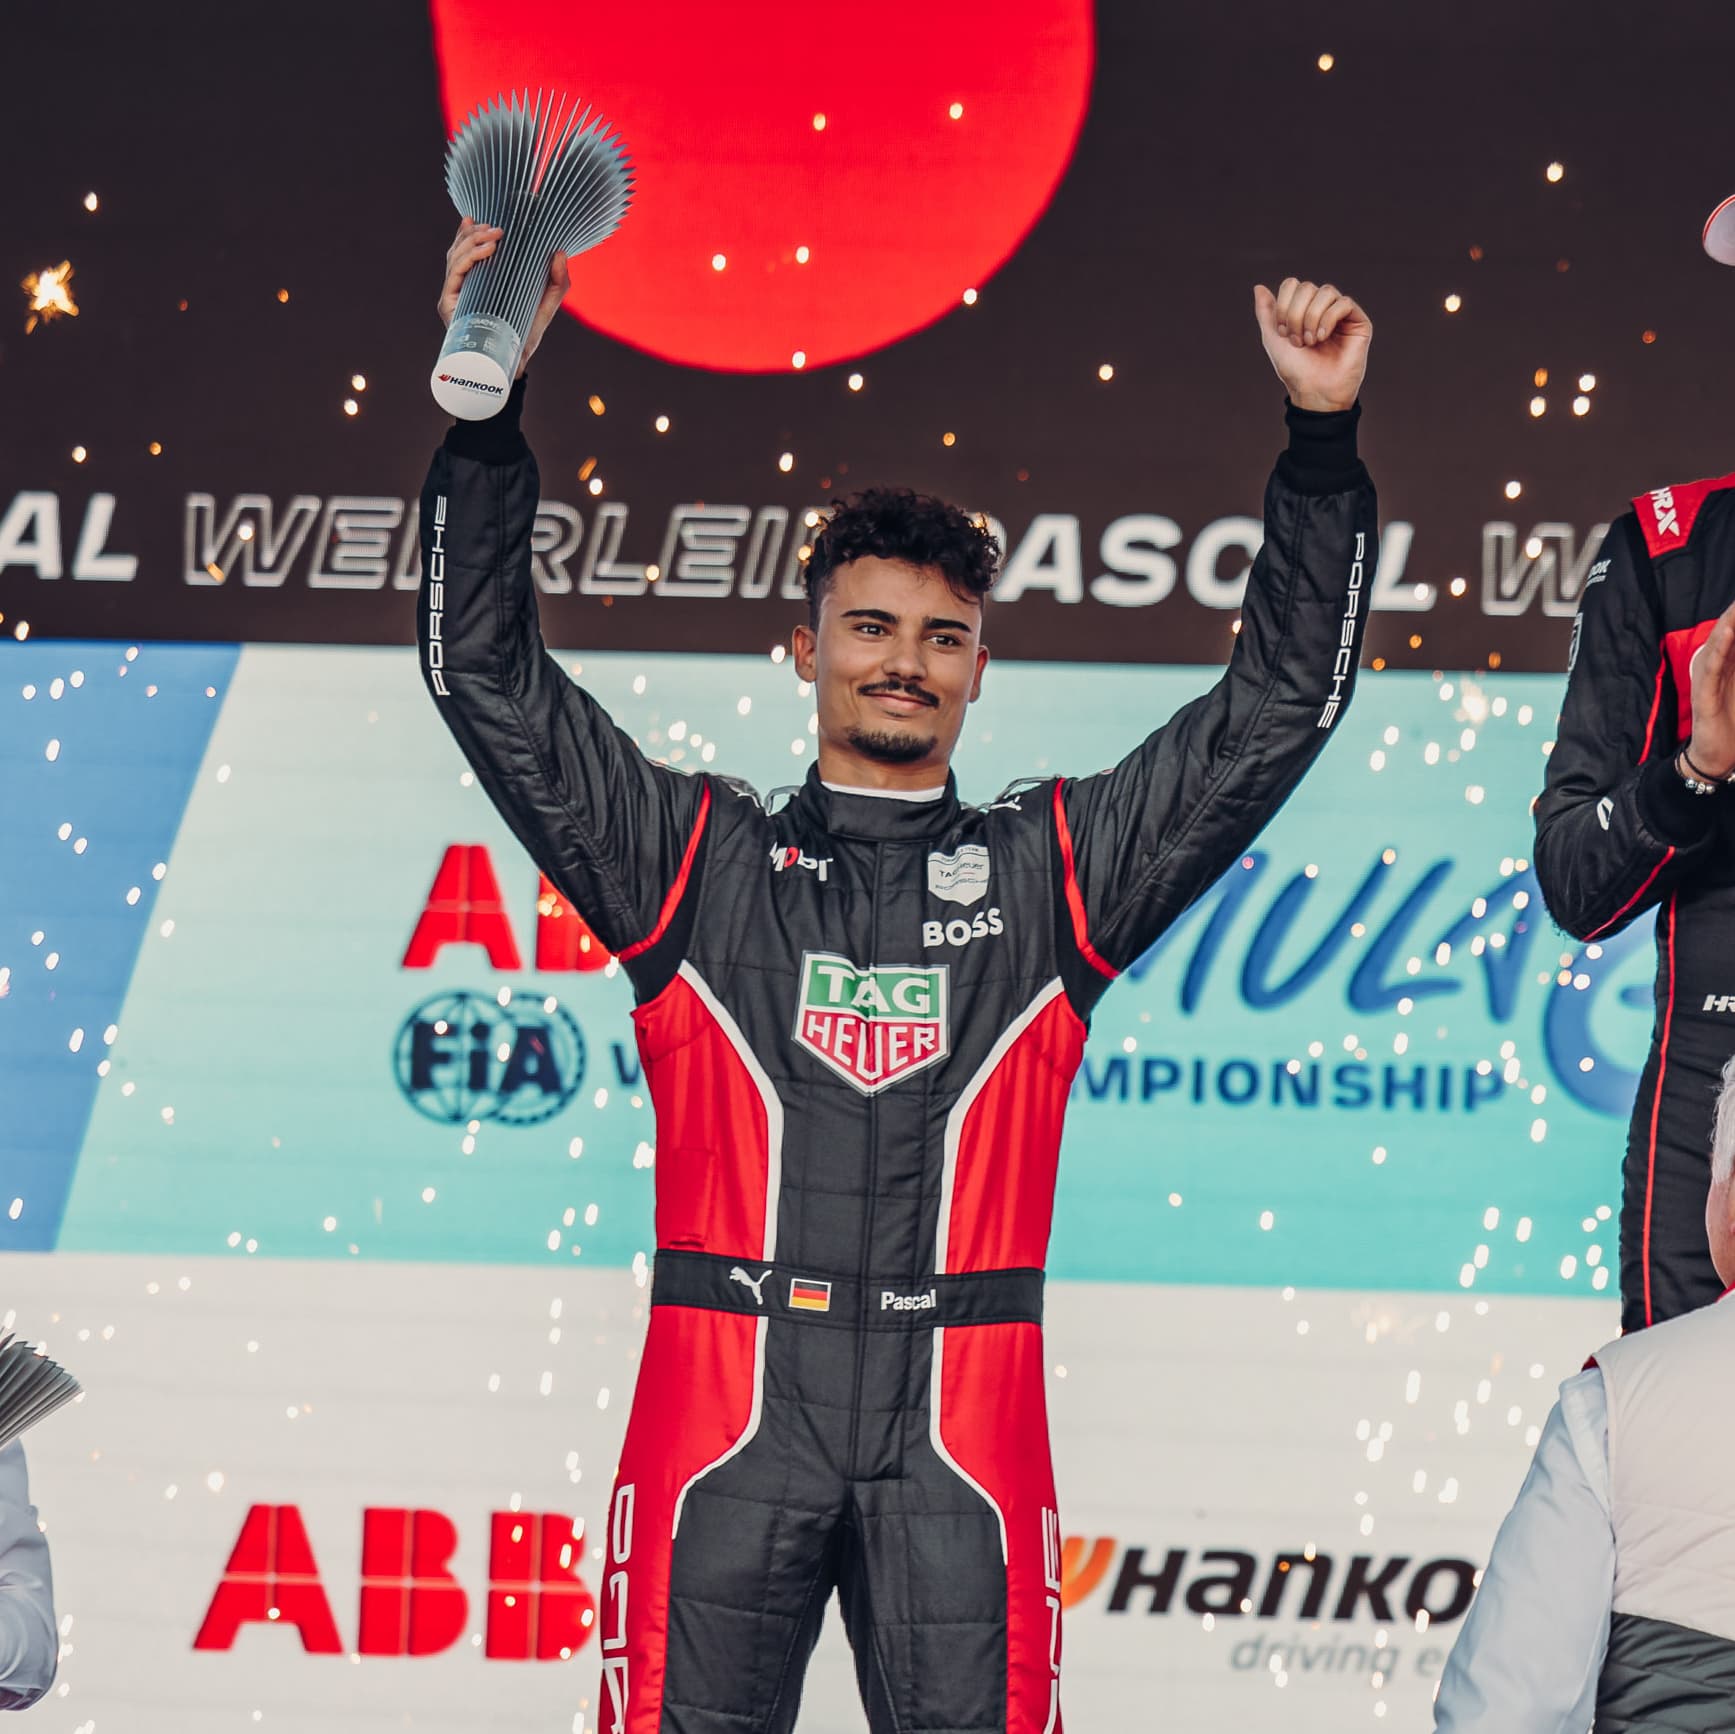 WEHRLEIN CHARGES TO SECOND IN MEXICAN E-PRIX!